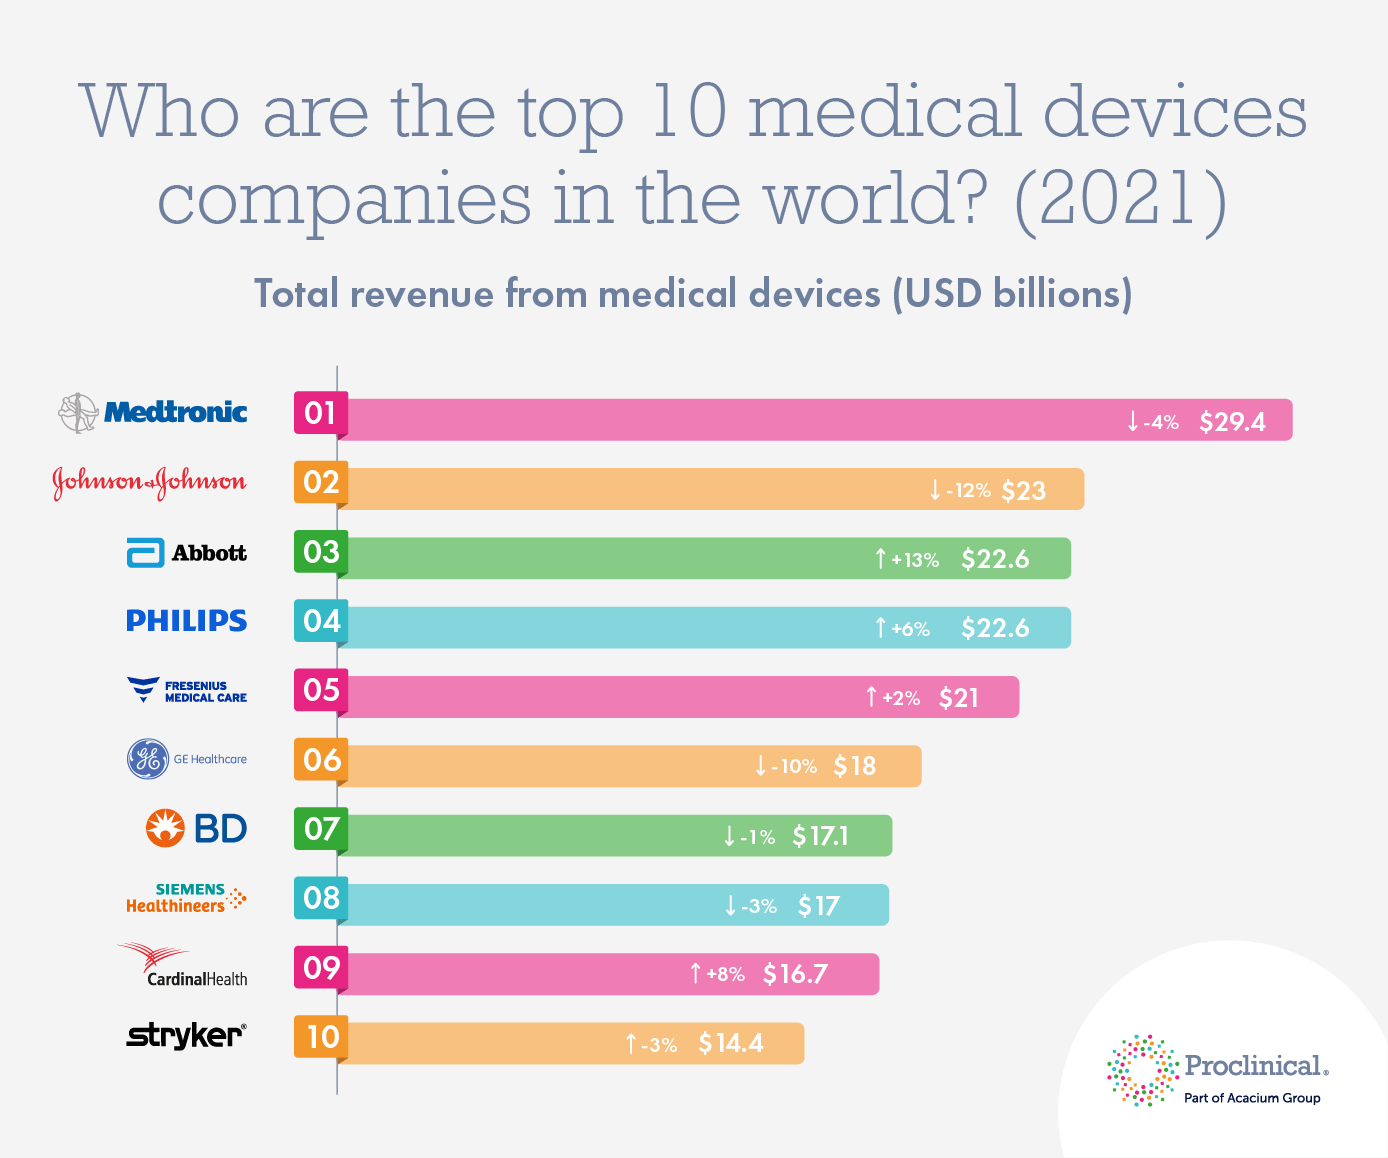 The Top 10 Medical Devices Companies in the World 2021